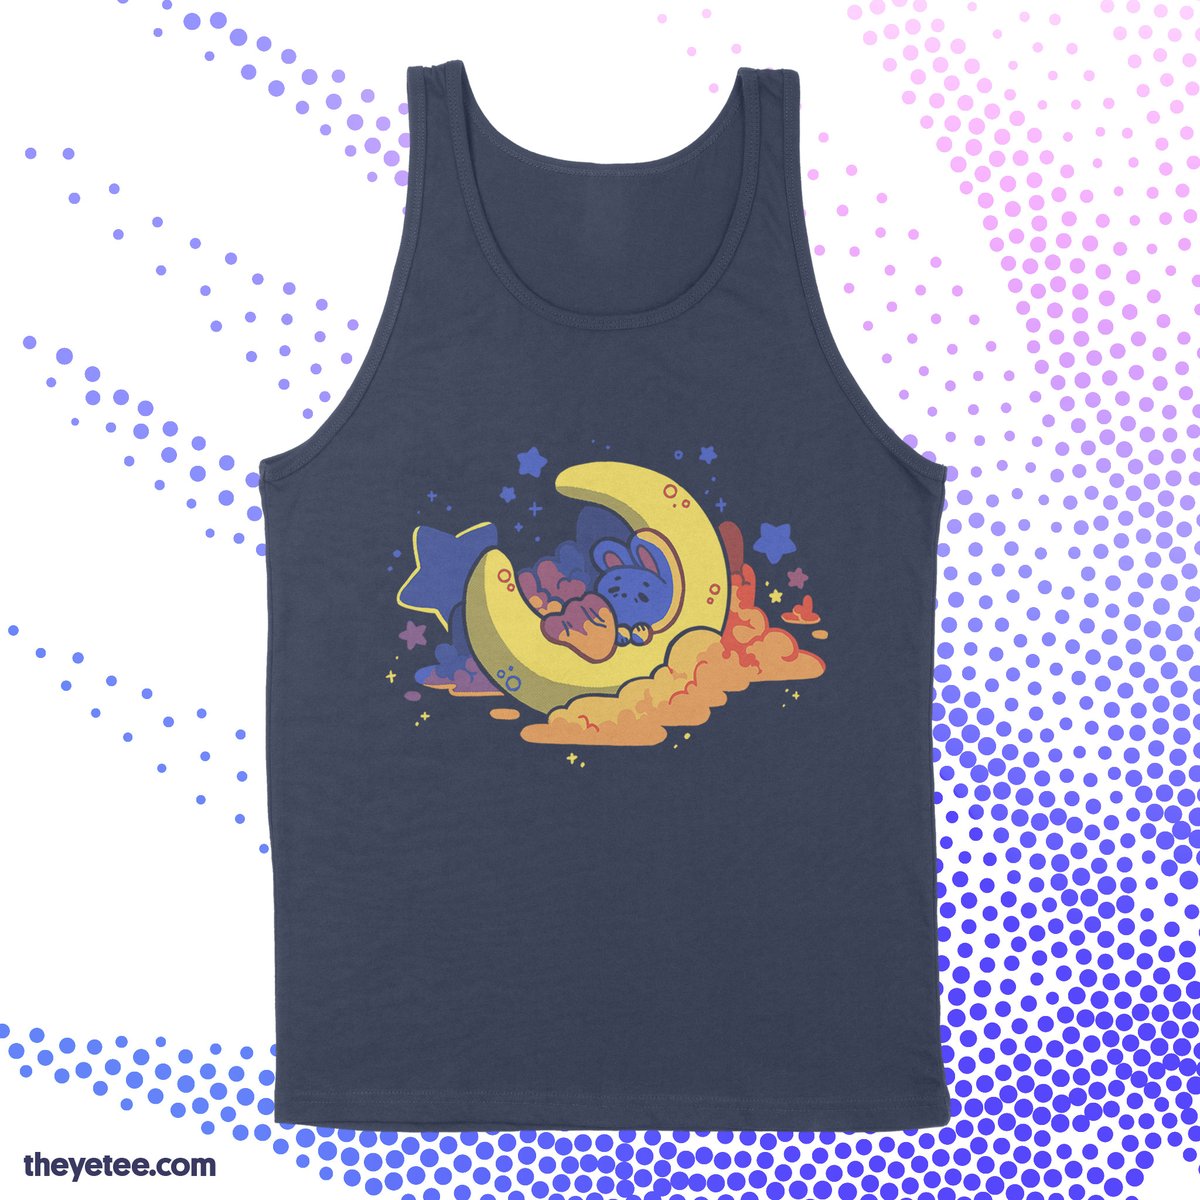 「We've been waxing and waning all night l」|The Yetee 🌈のイラスト